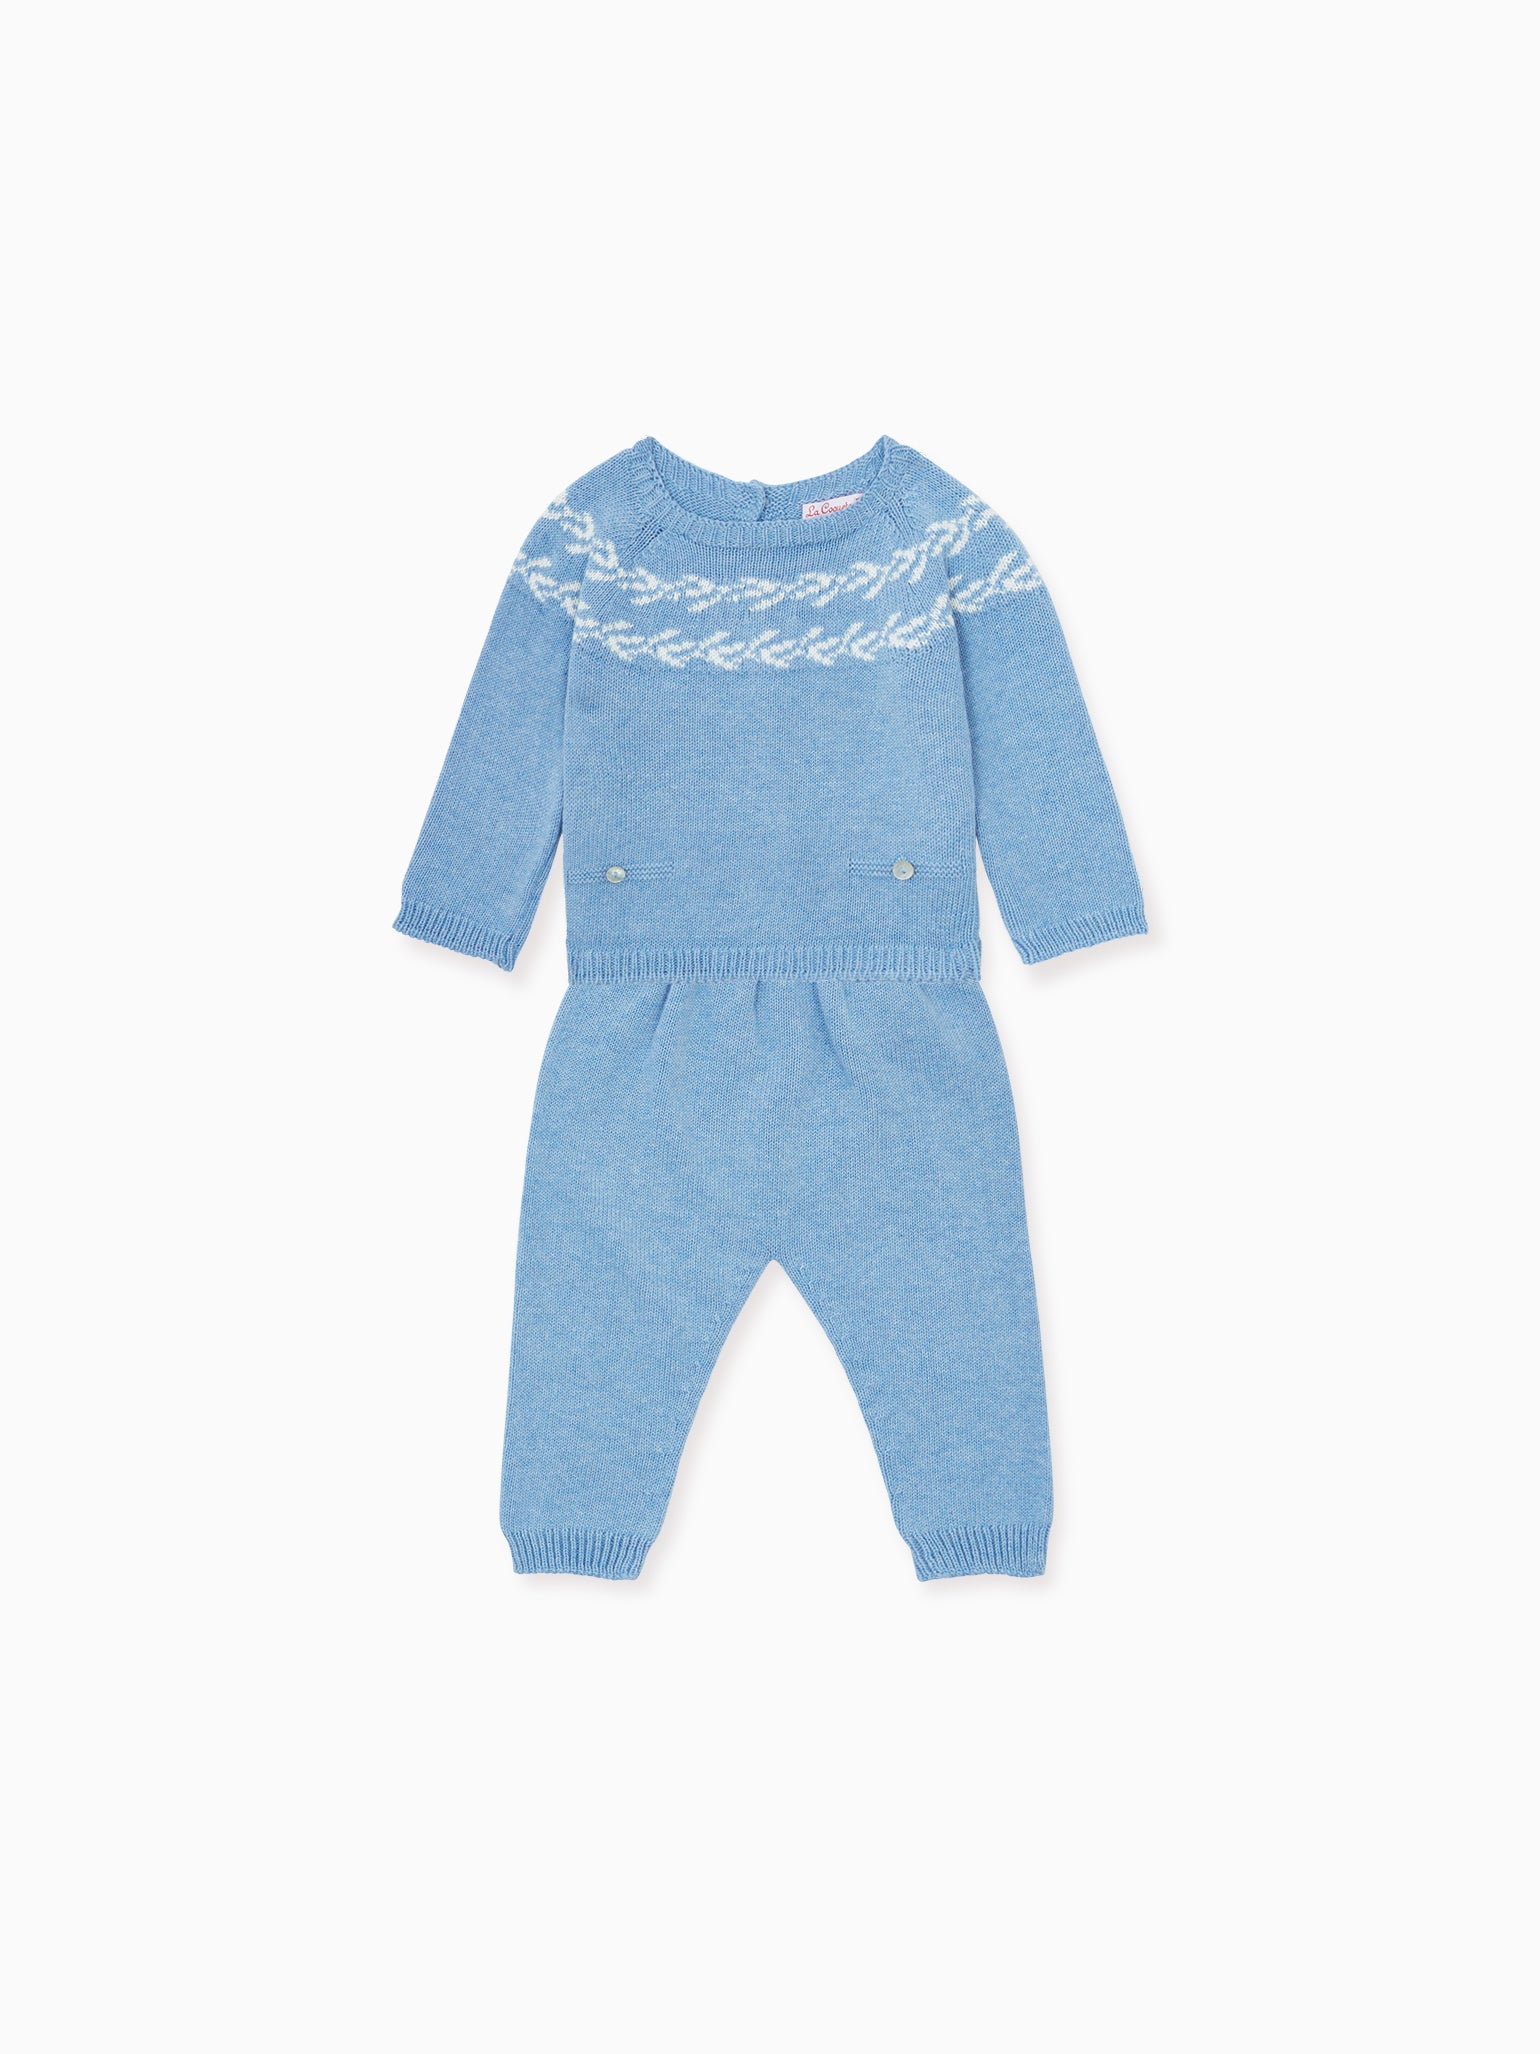 Blue Intarsia Cotton Knitted Baby Set